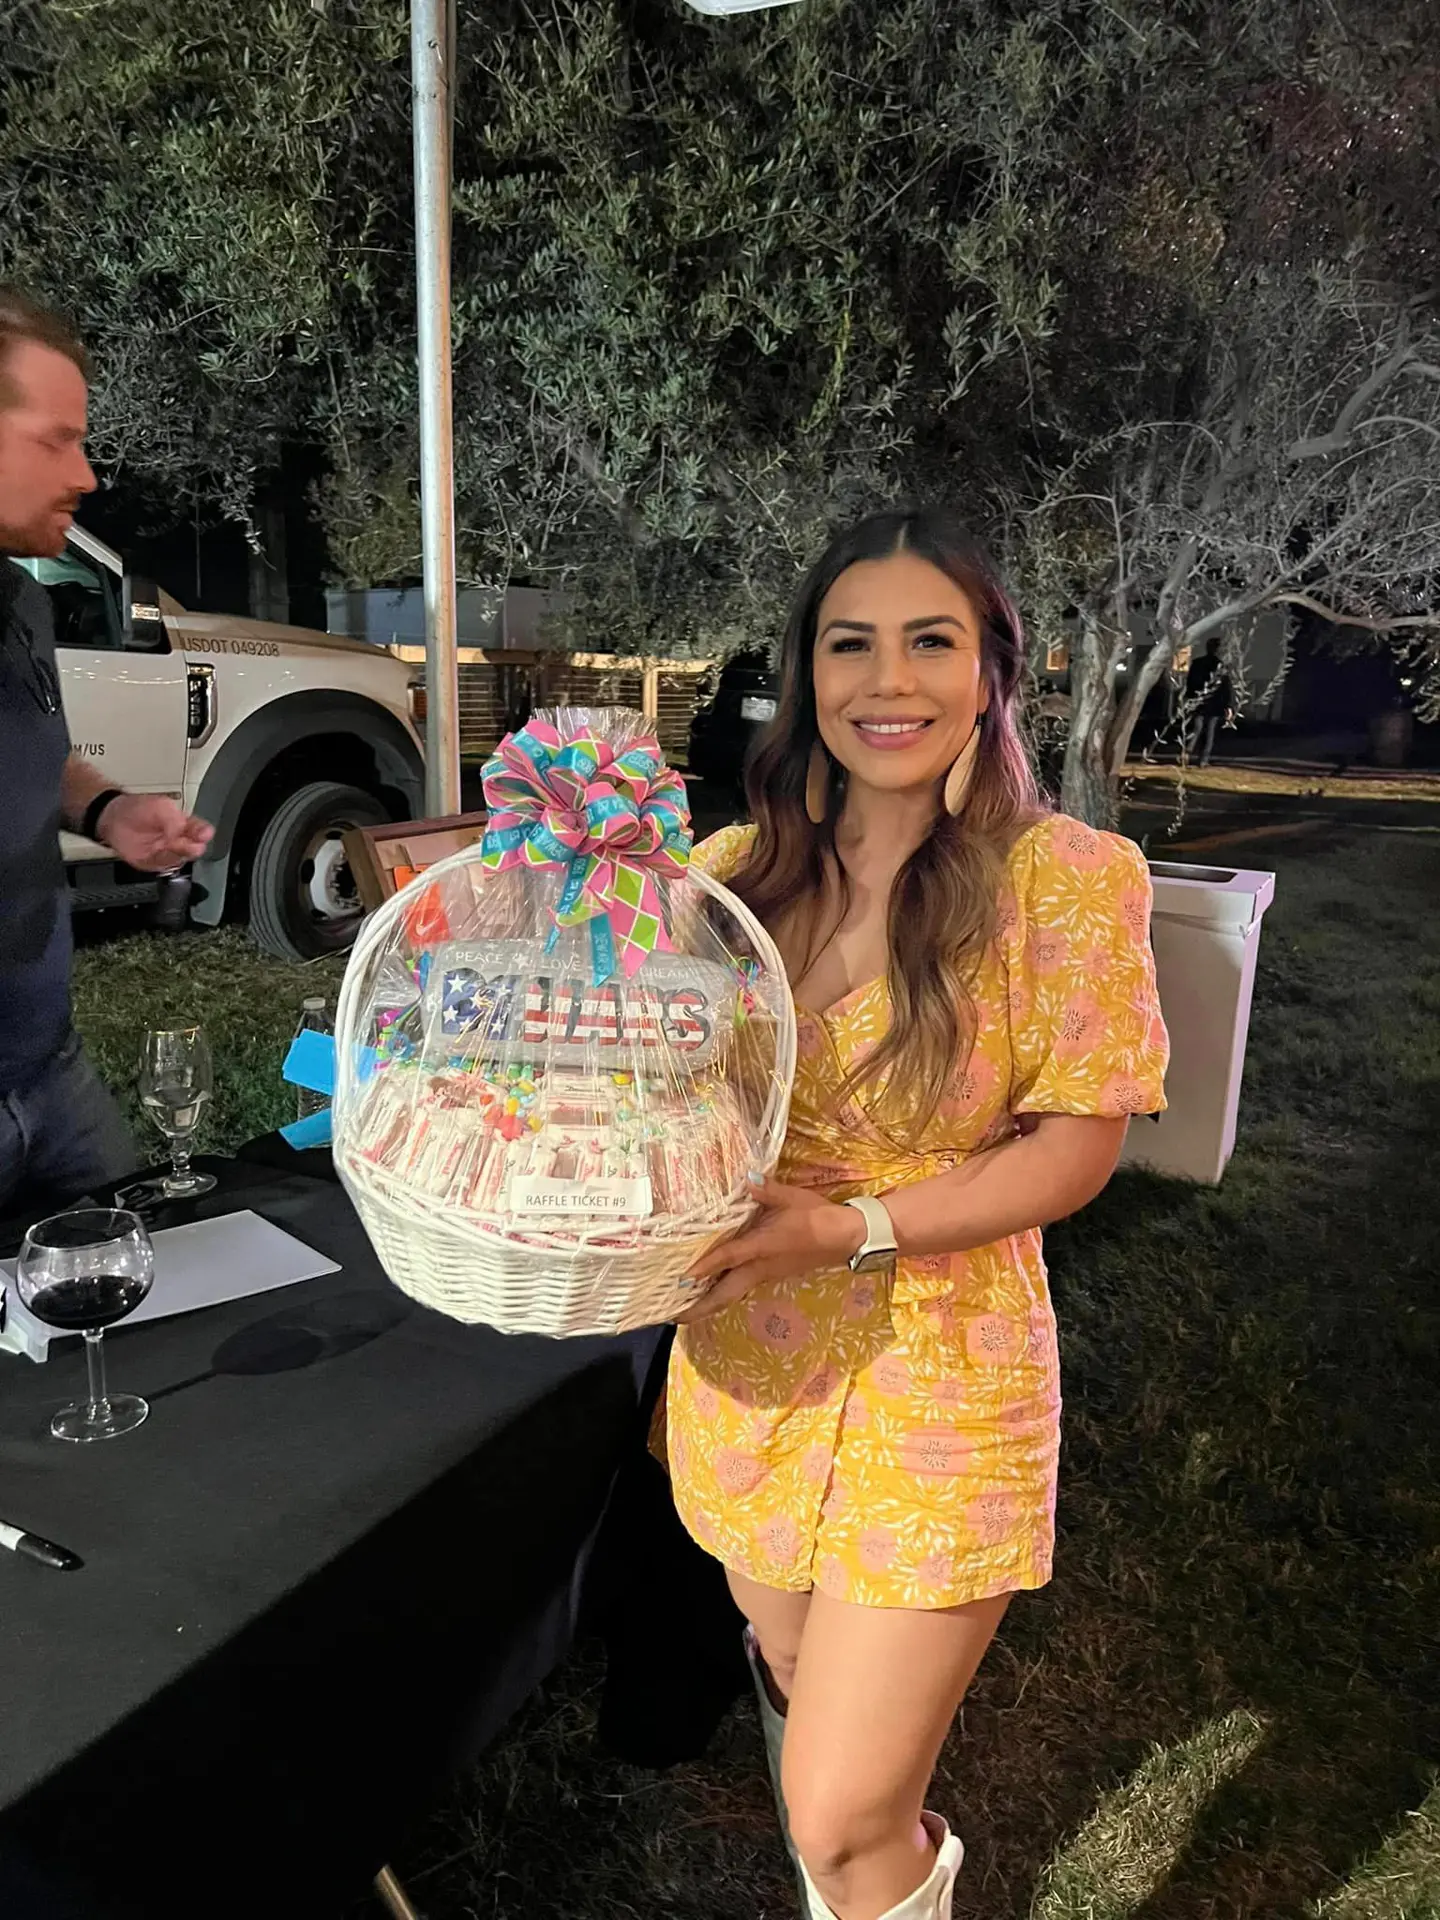 A woman holding a raffle ticket gift basket at Dust Bowl to Diamonds